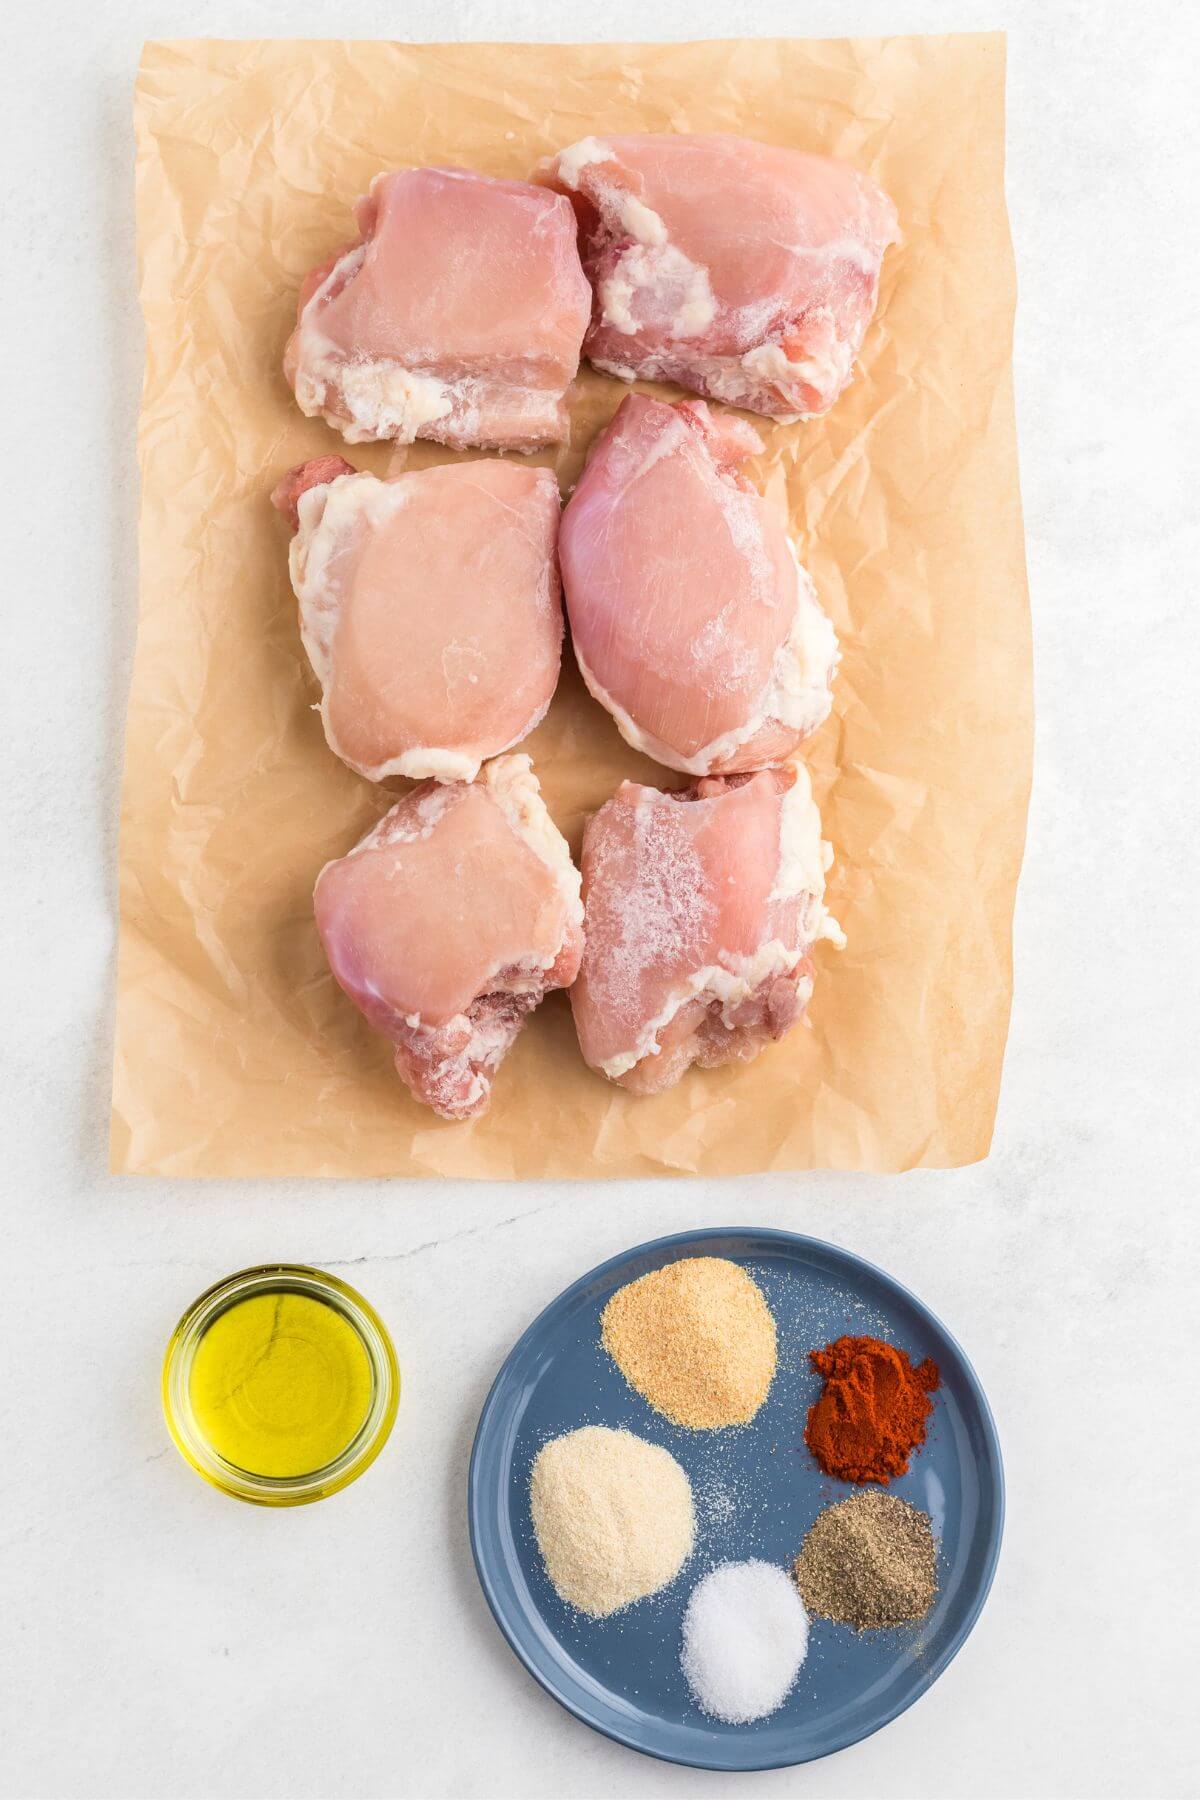 Uncooked chicken thighs, seasonings, and olive oil measured out on a table. 